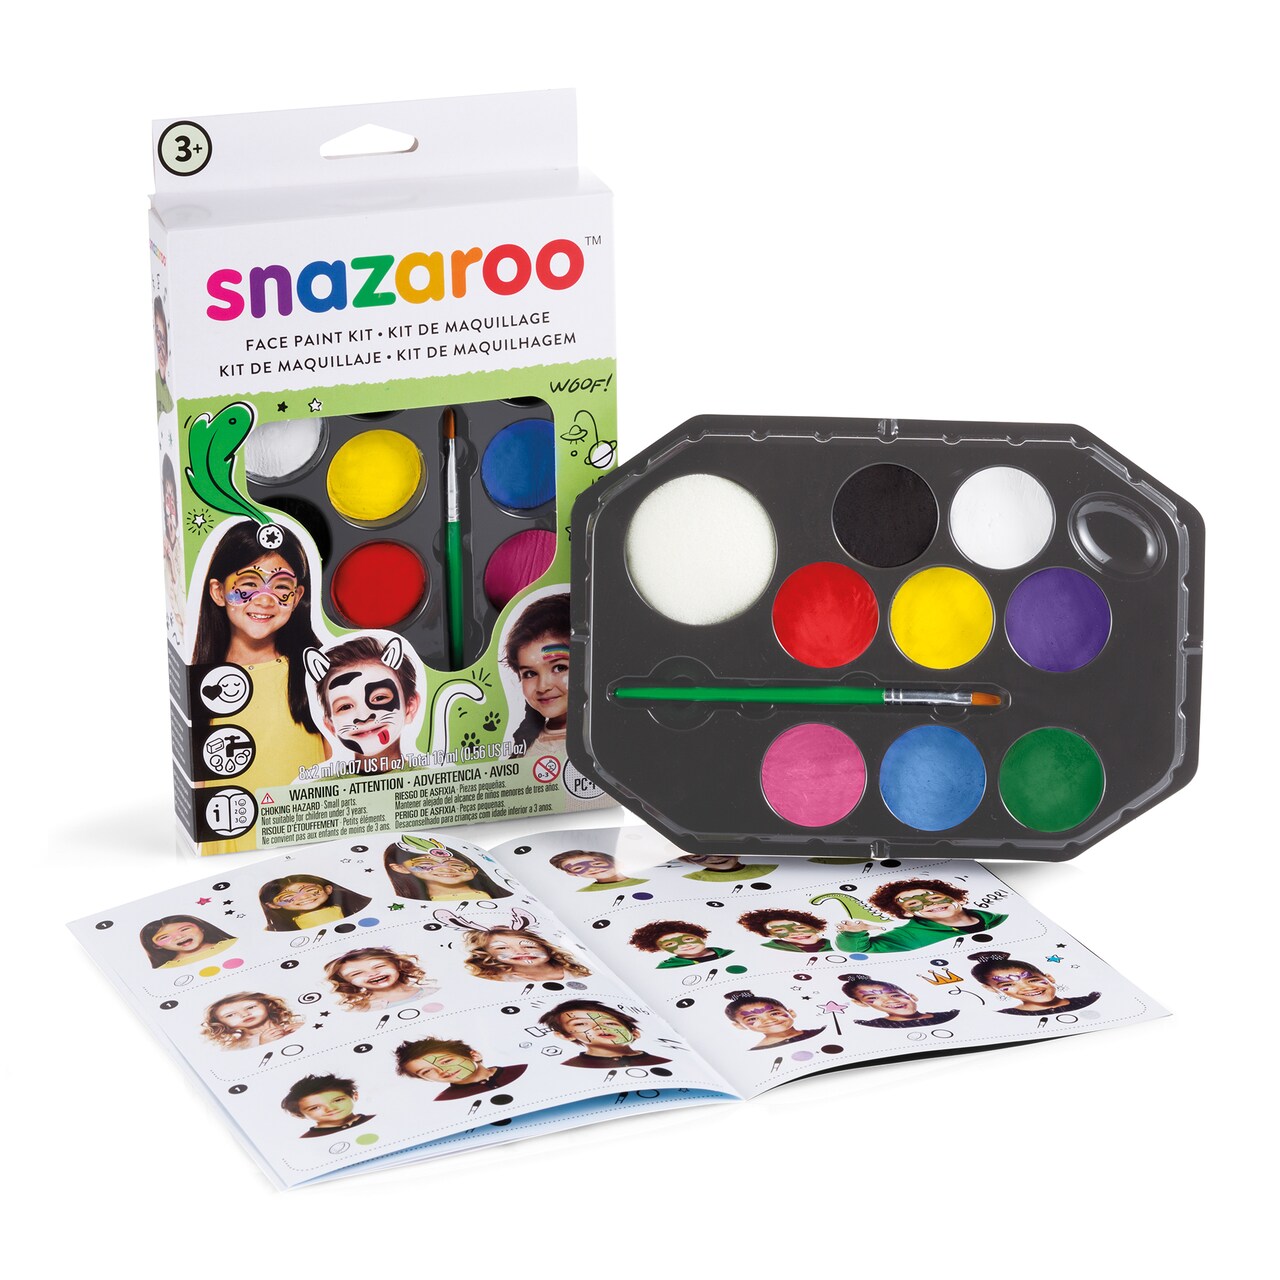 Snazaroo Halloween Face Painting Workshop with Mandy Peltier, Classes